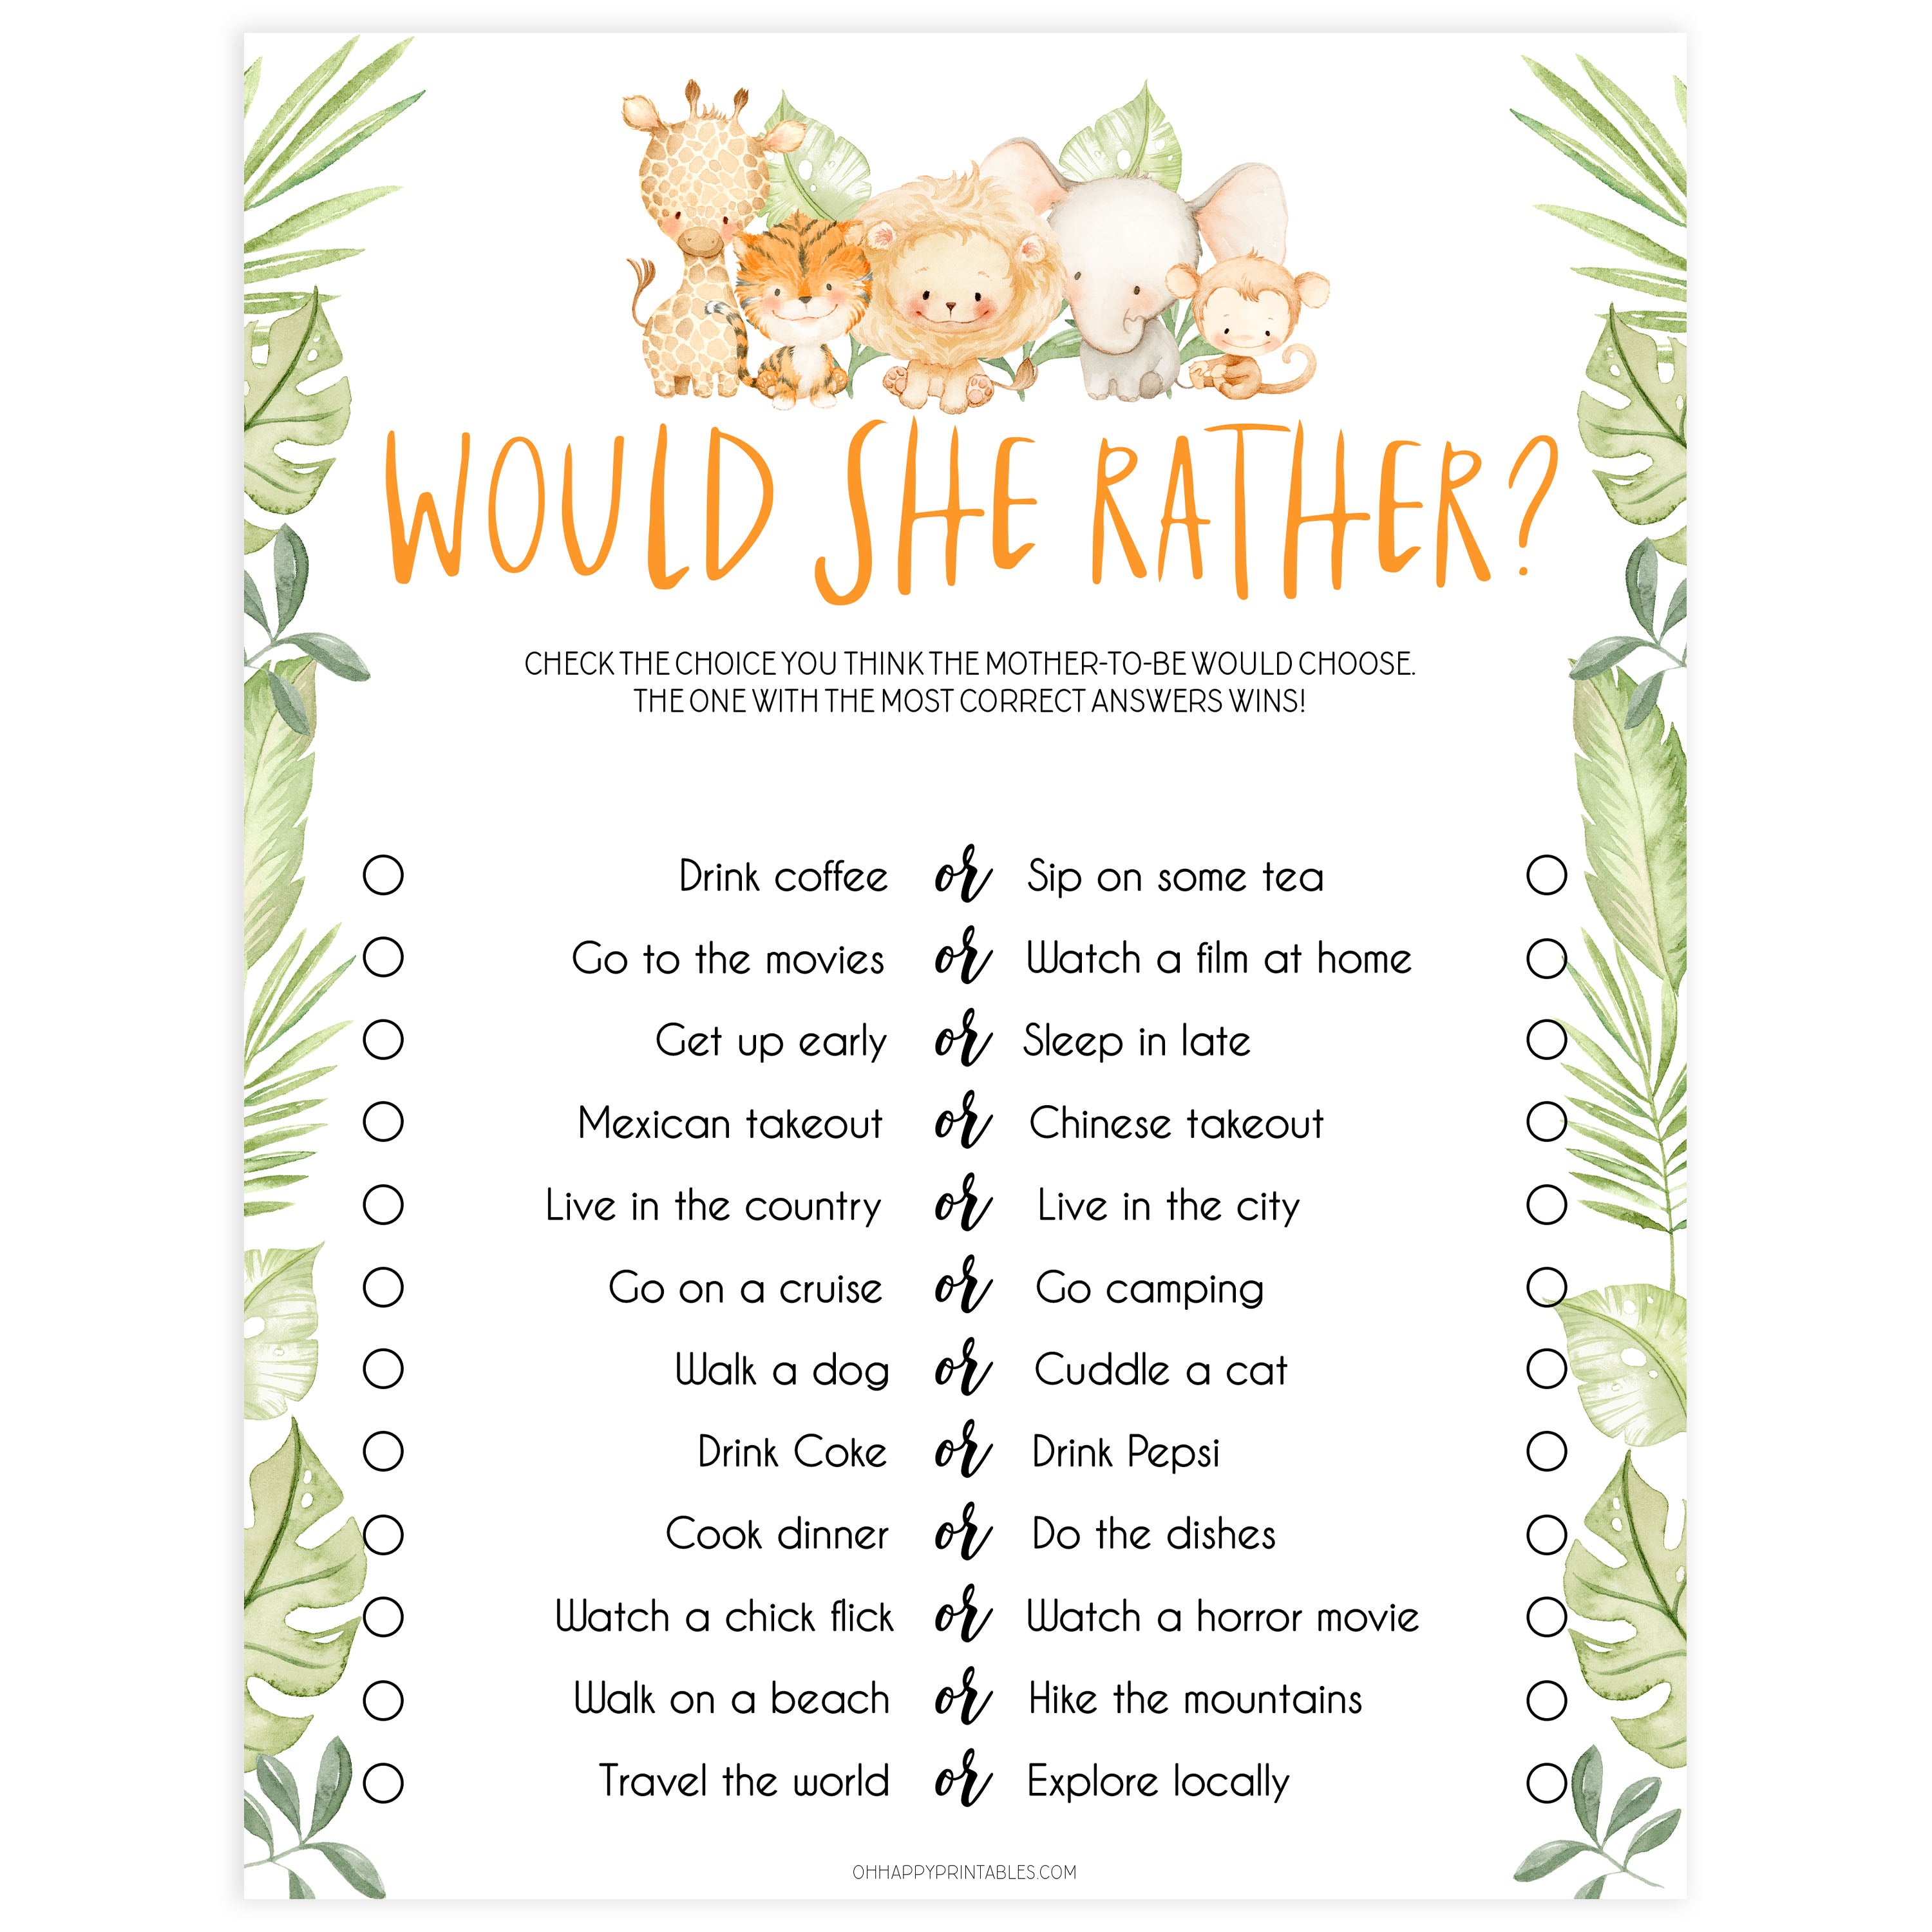 would she rather baby game, Printable baby shower games, safari animals baby games, baby shower games, fun baby shower ideas, top baby shower ideas, safari animals baby shower, baby shower games, fun baby shower ideas